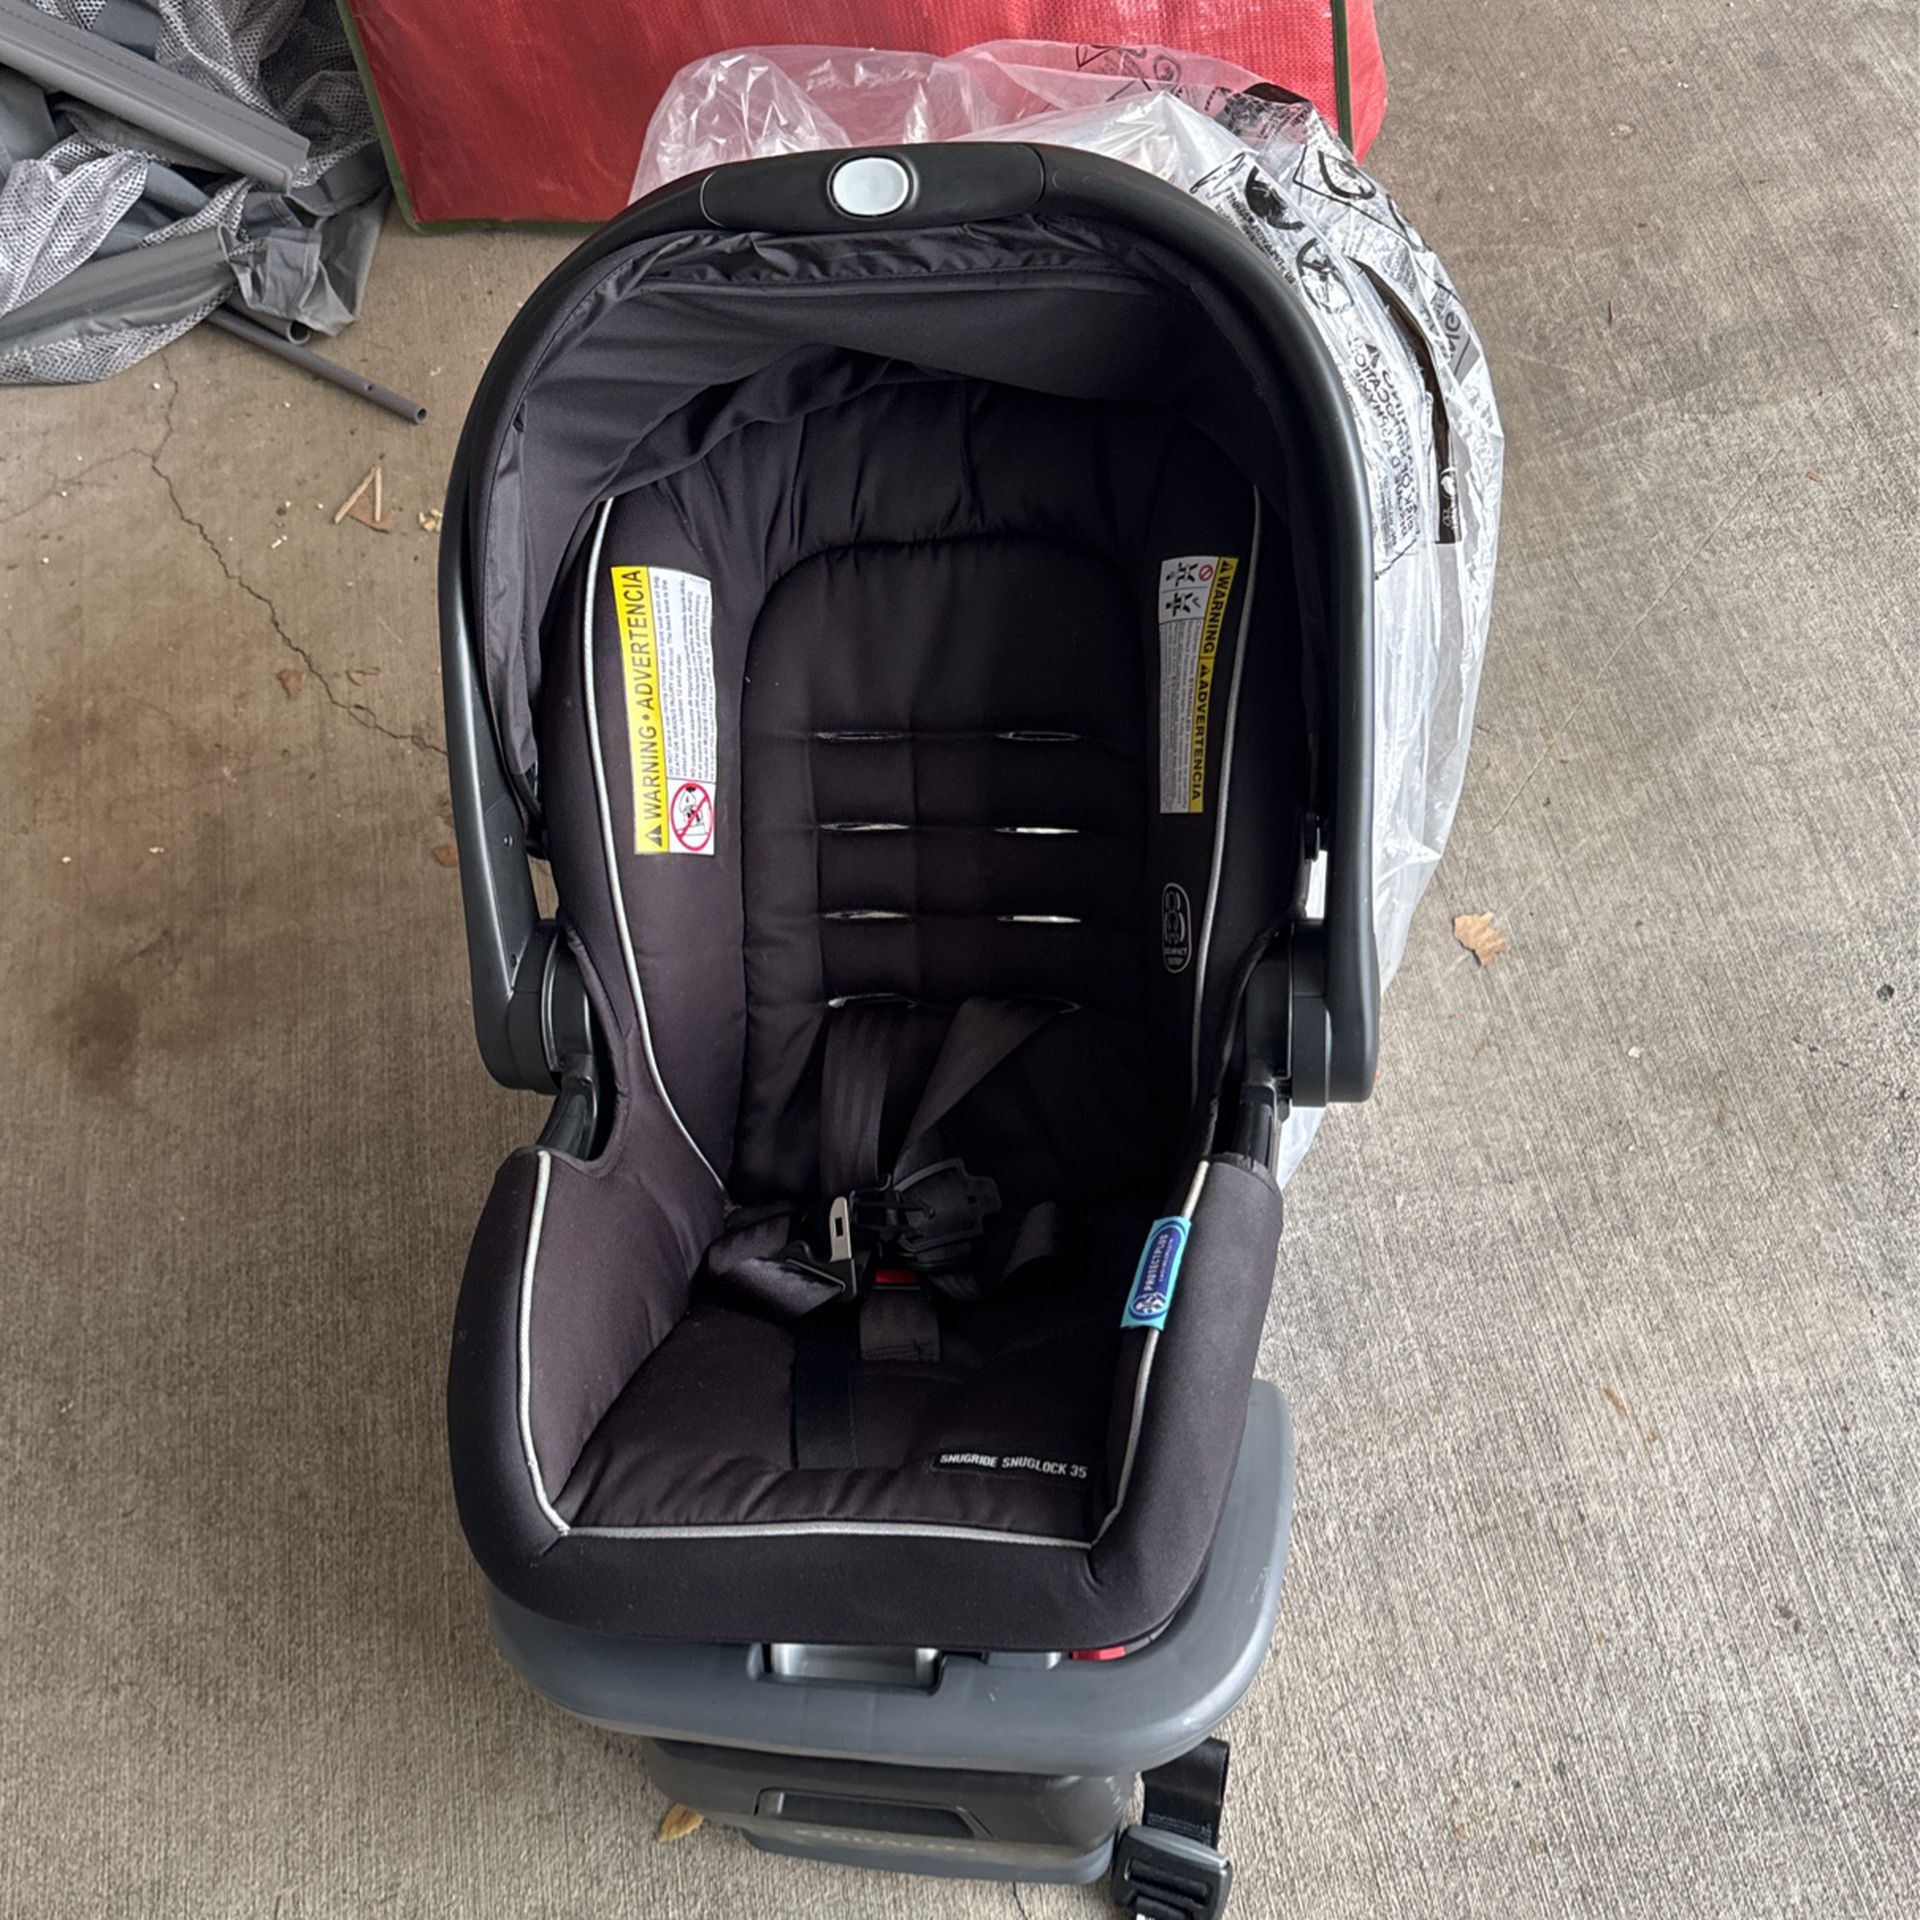 Graco Infant Car Seat - Used - Reduced Price